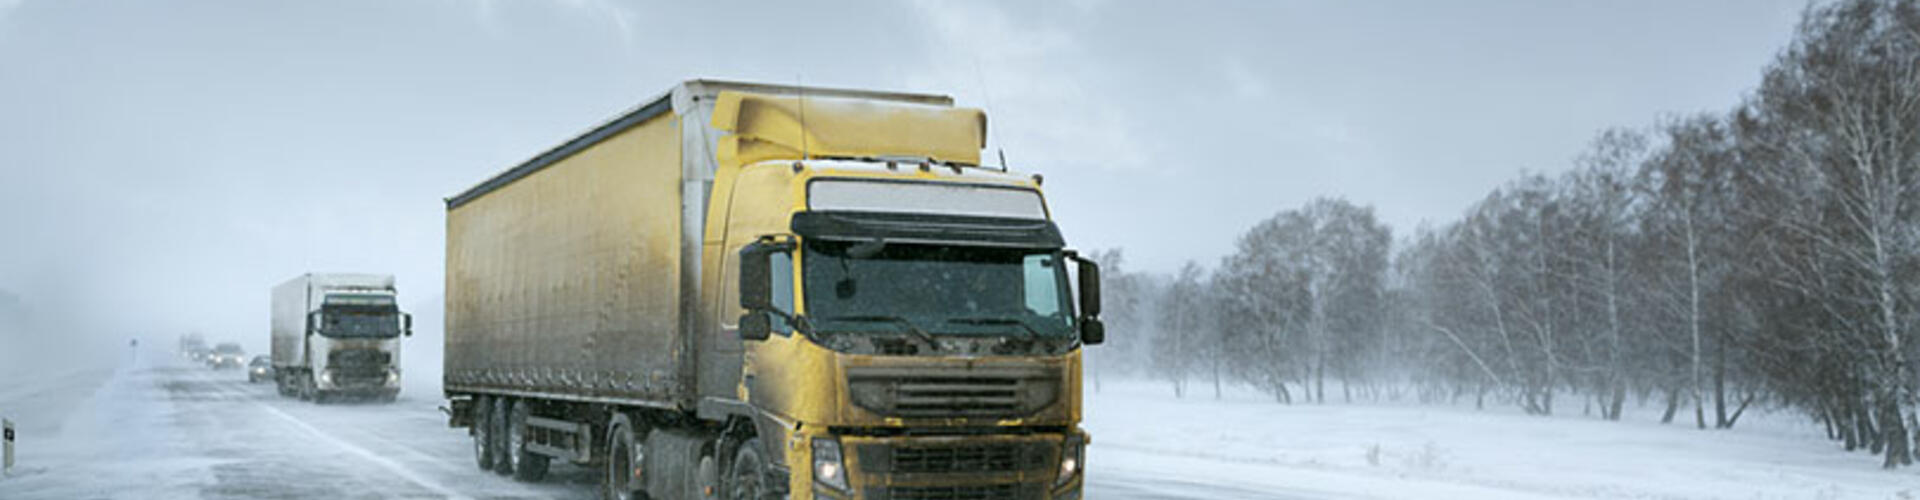 6 Important Tips to Consider as an Ice Trucker